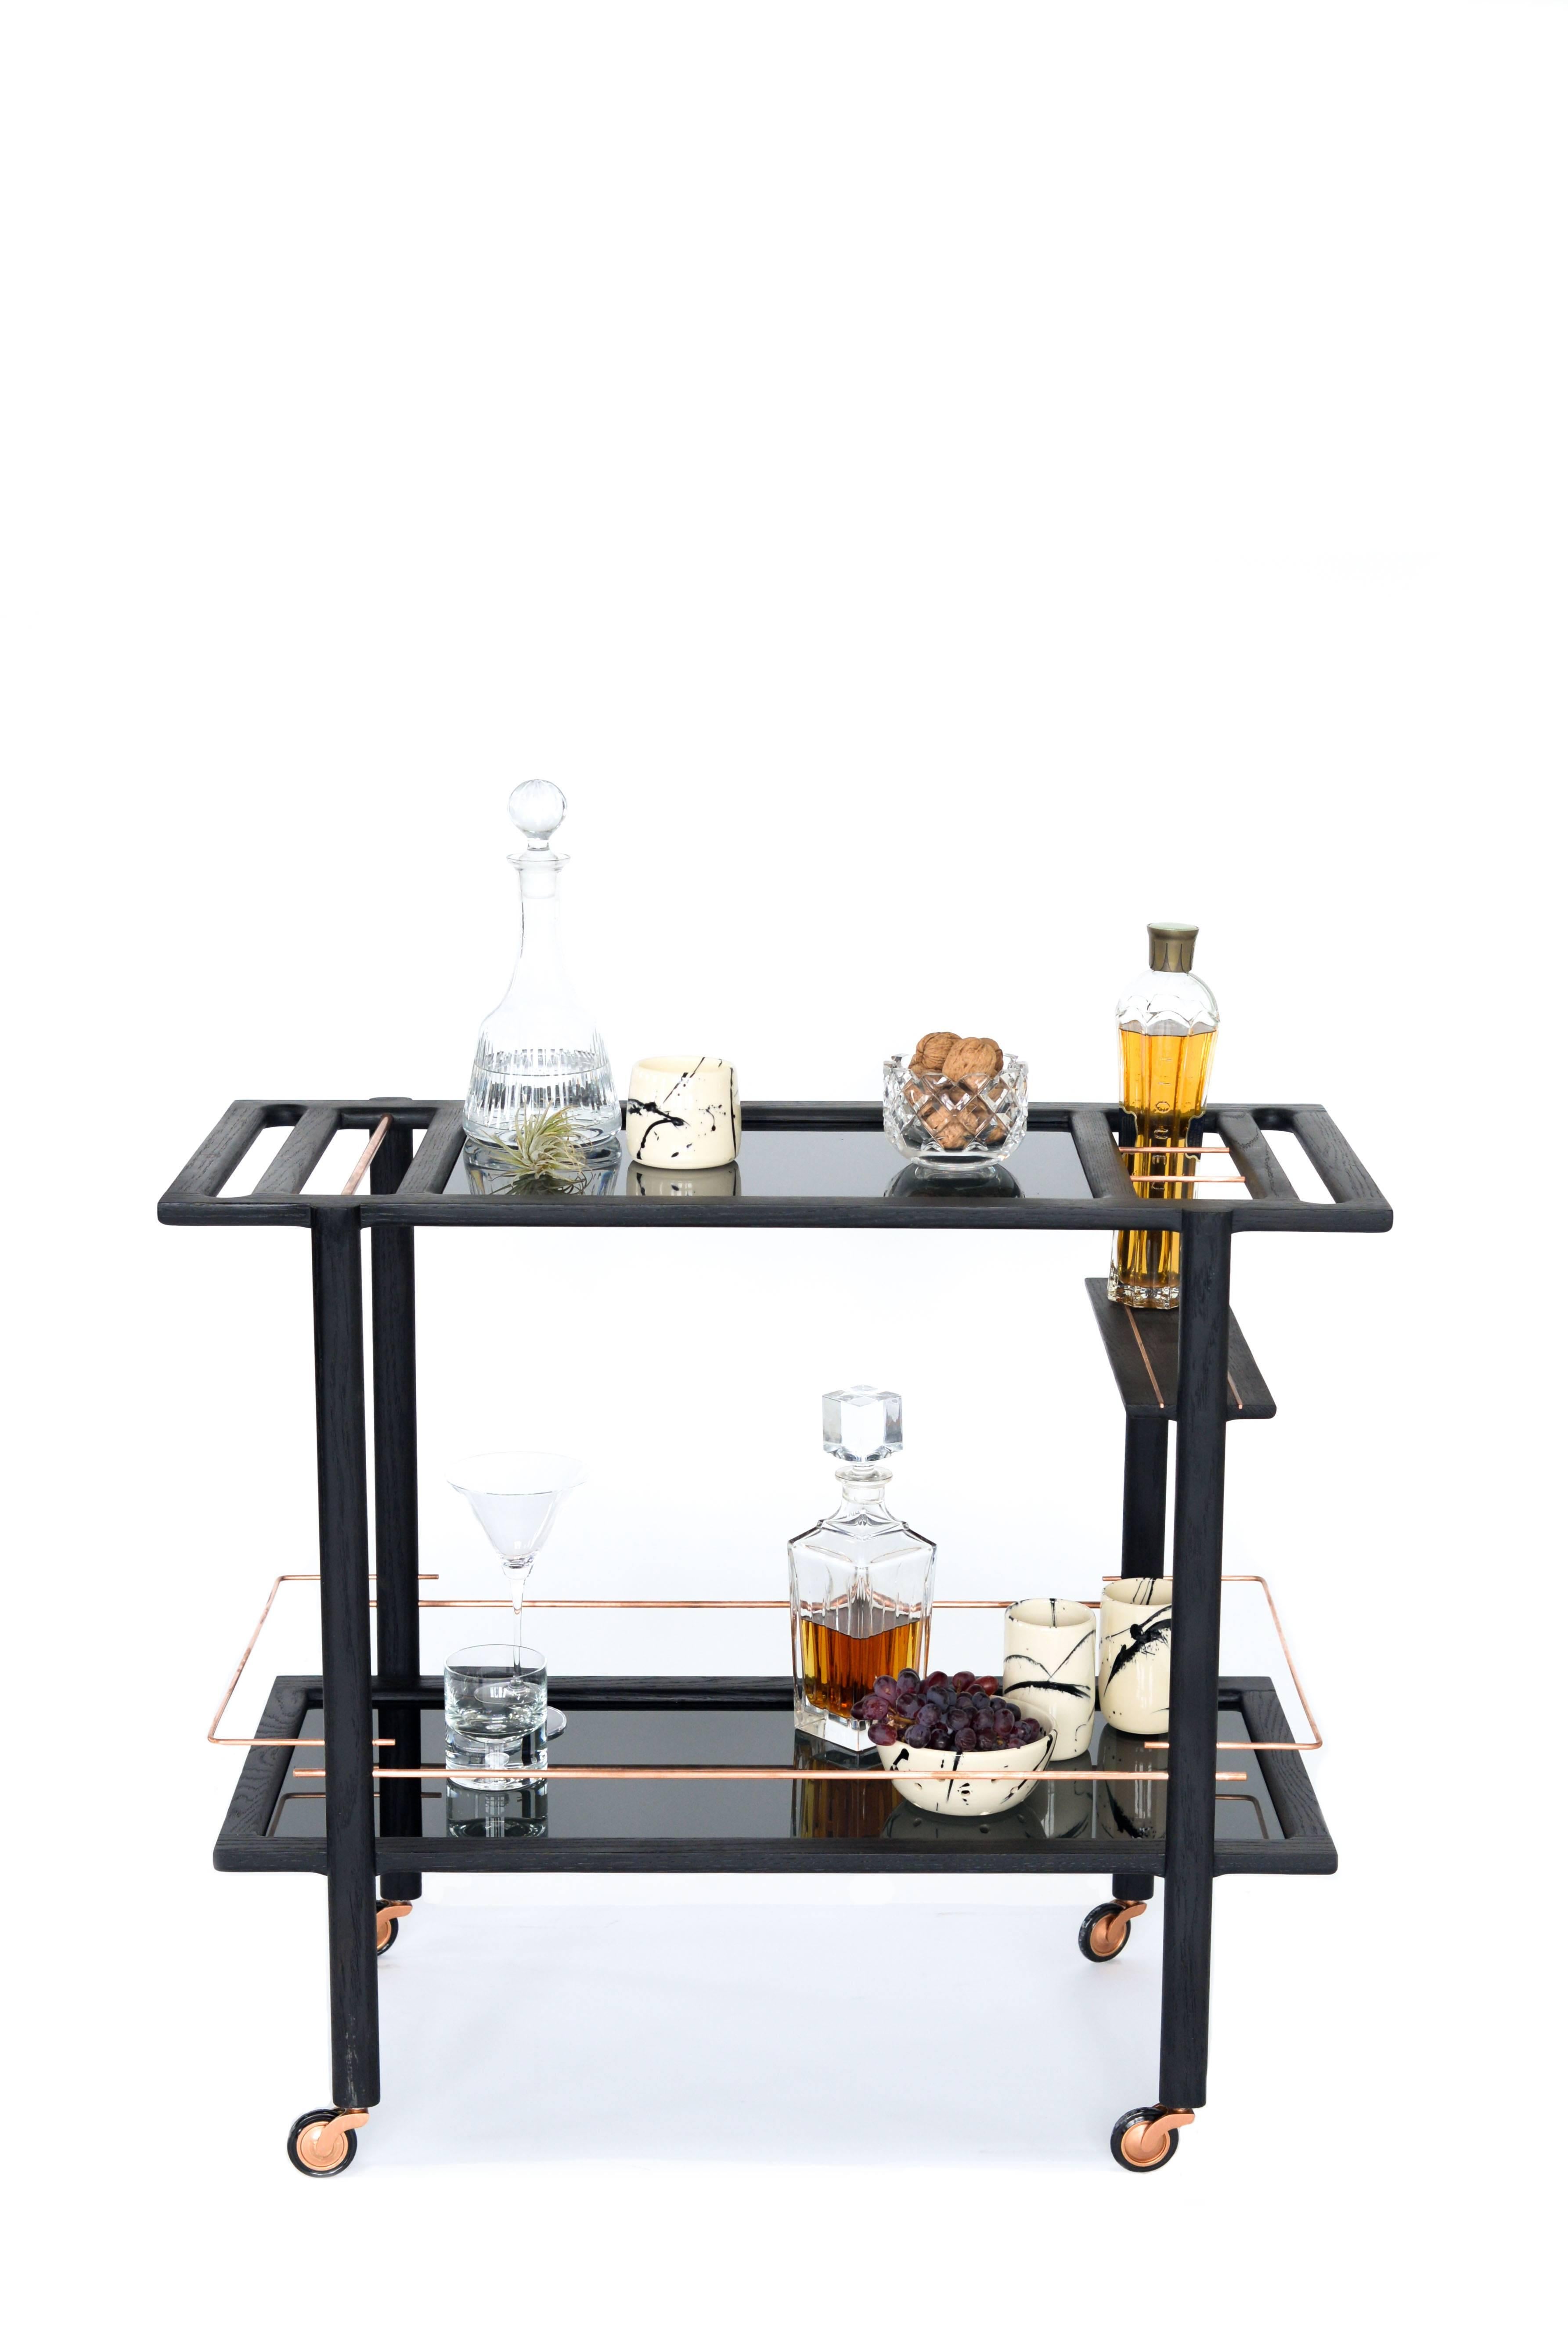 Solid wood constructed barcart with hand-cut joinery, tempered glass panels, and fine metal accents. Handmade in Los Angeles, California.  

Shown in ebonized oak, copper with smoked glass. 

Please inquire for custom wood, metal and glass options. 